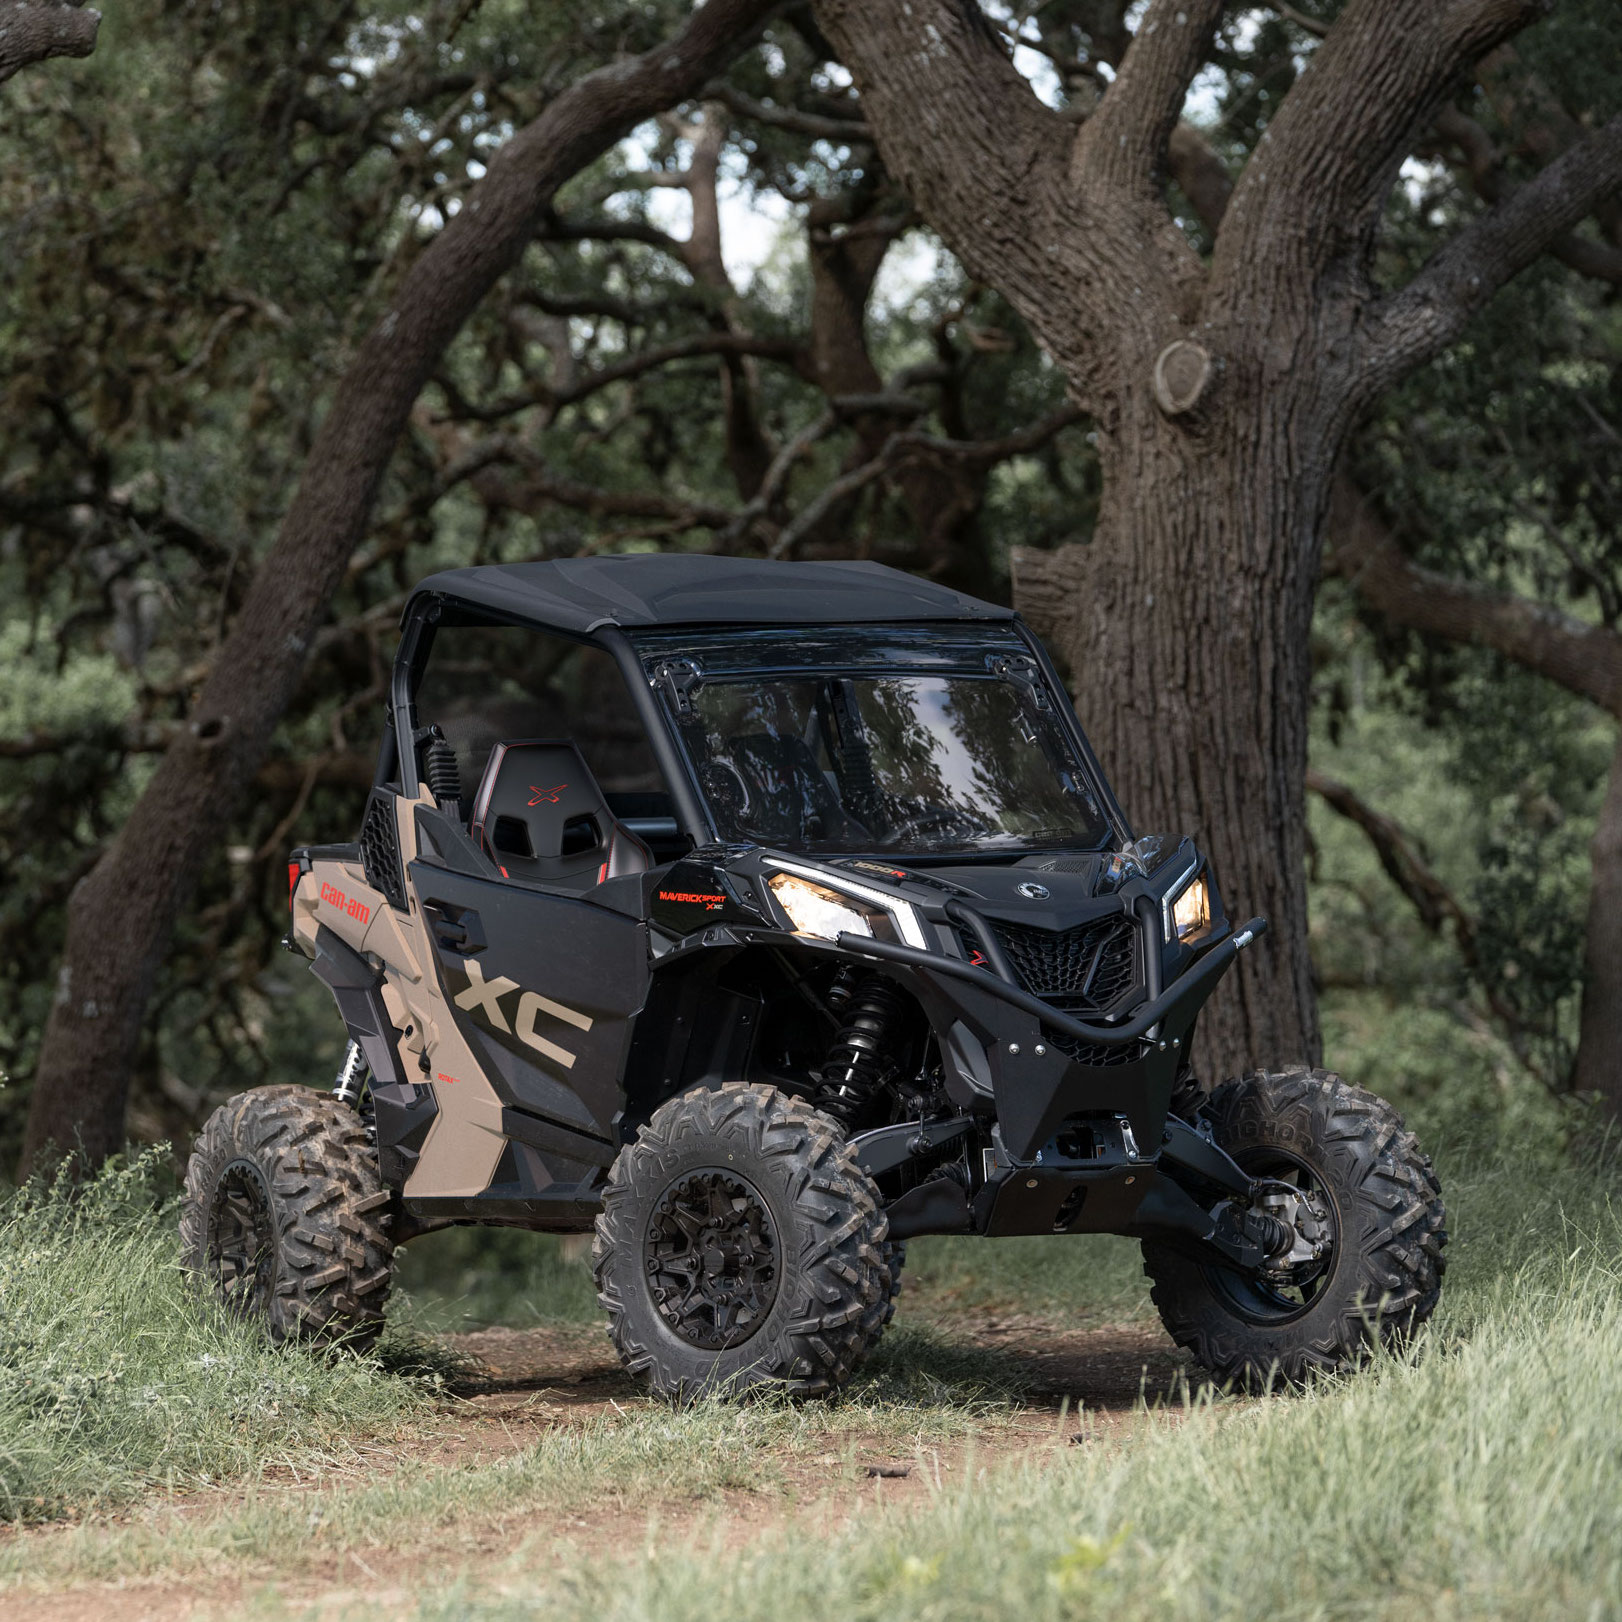 A Desert Tan and Carbon Black Can-Am Maverick Sport X XC parked in a forest setting 